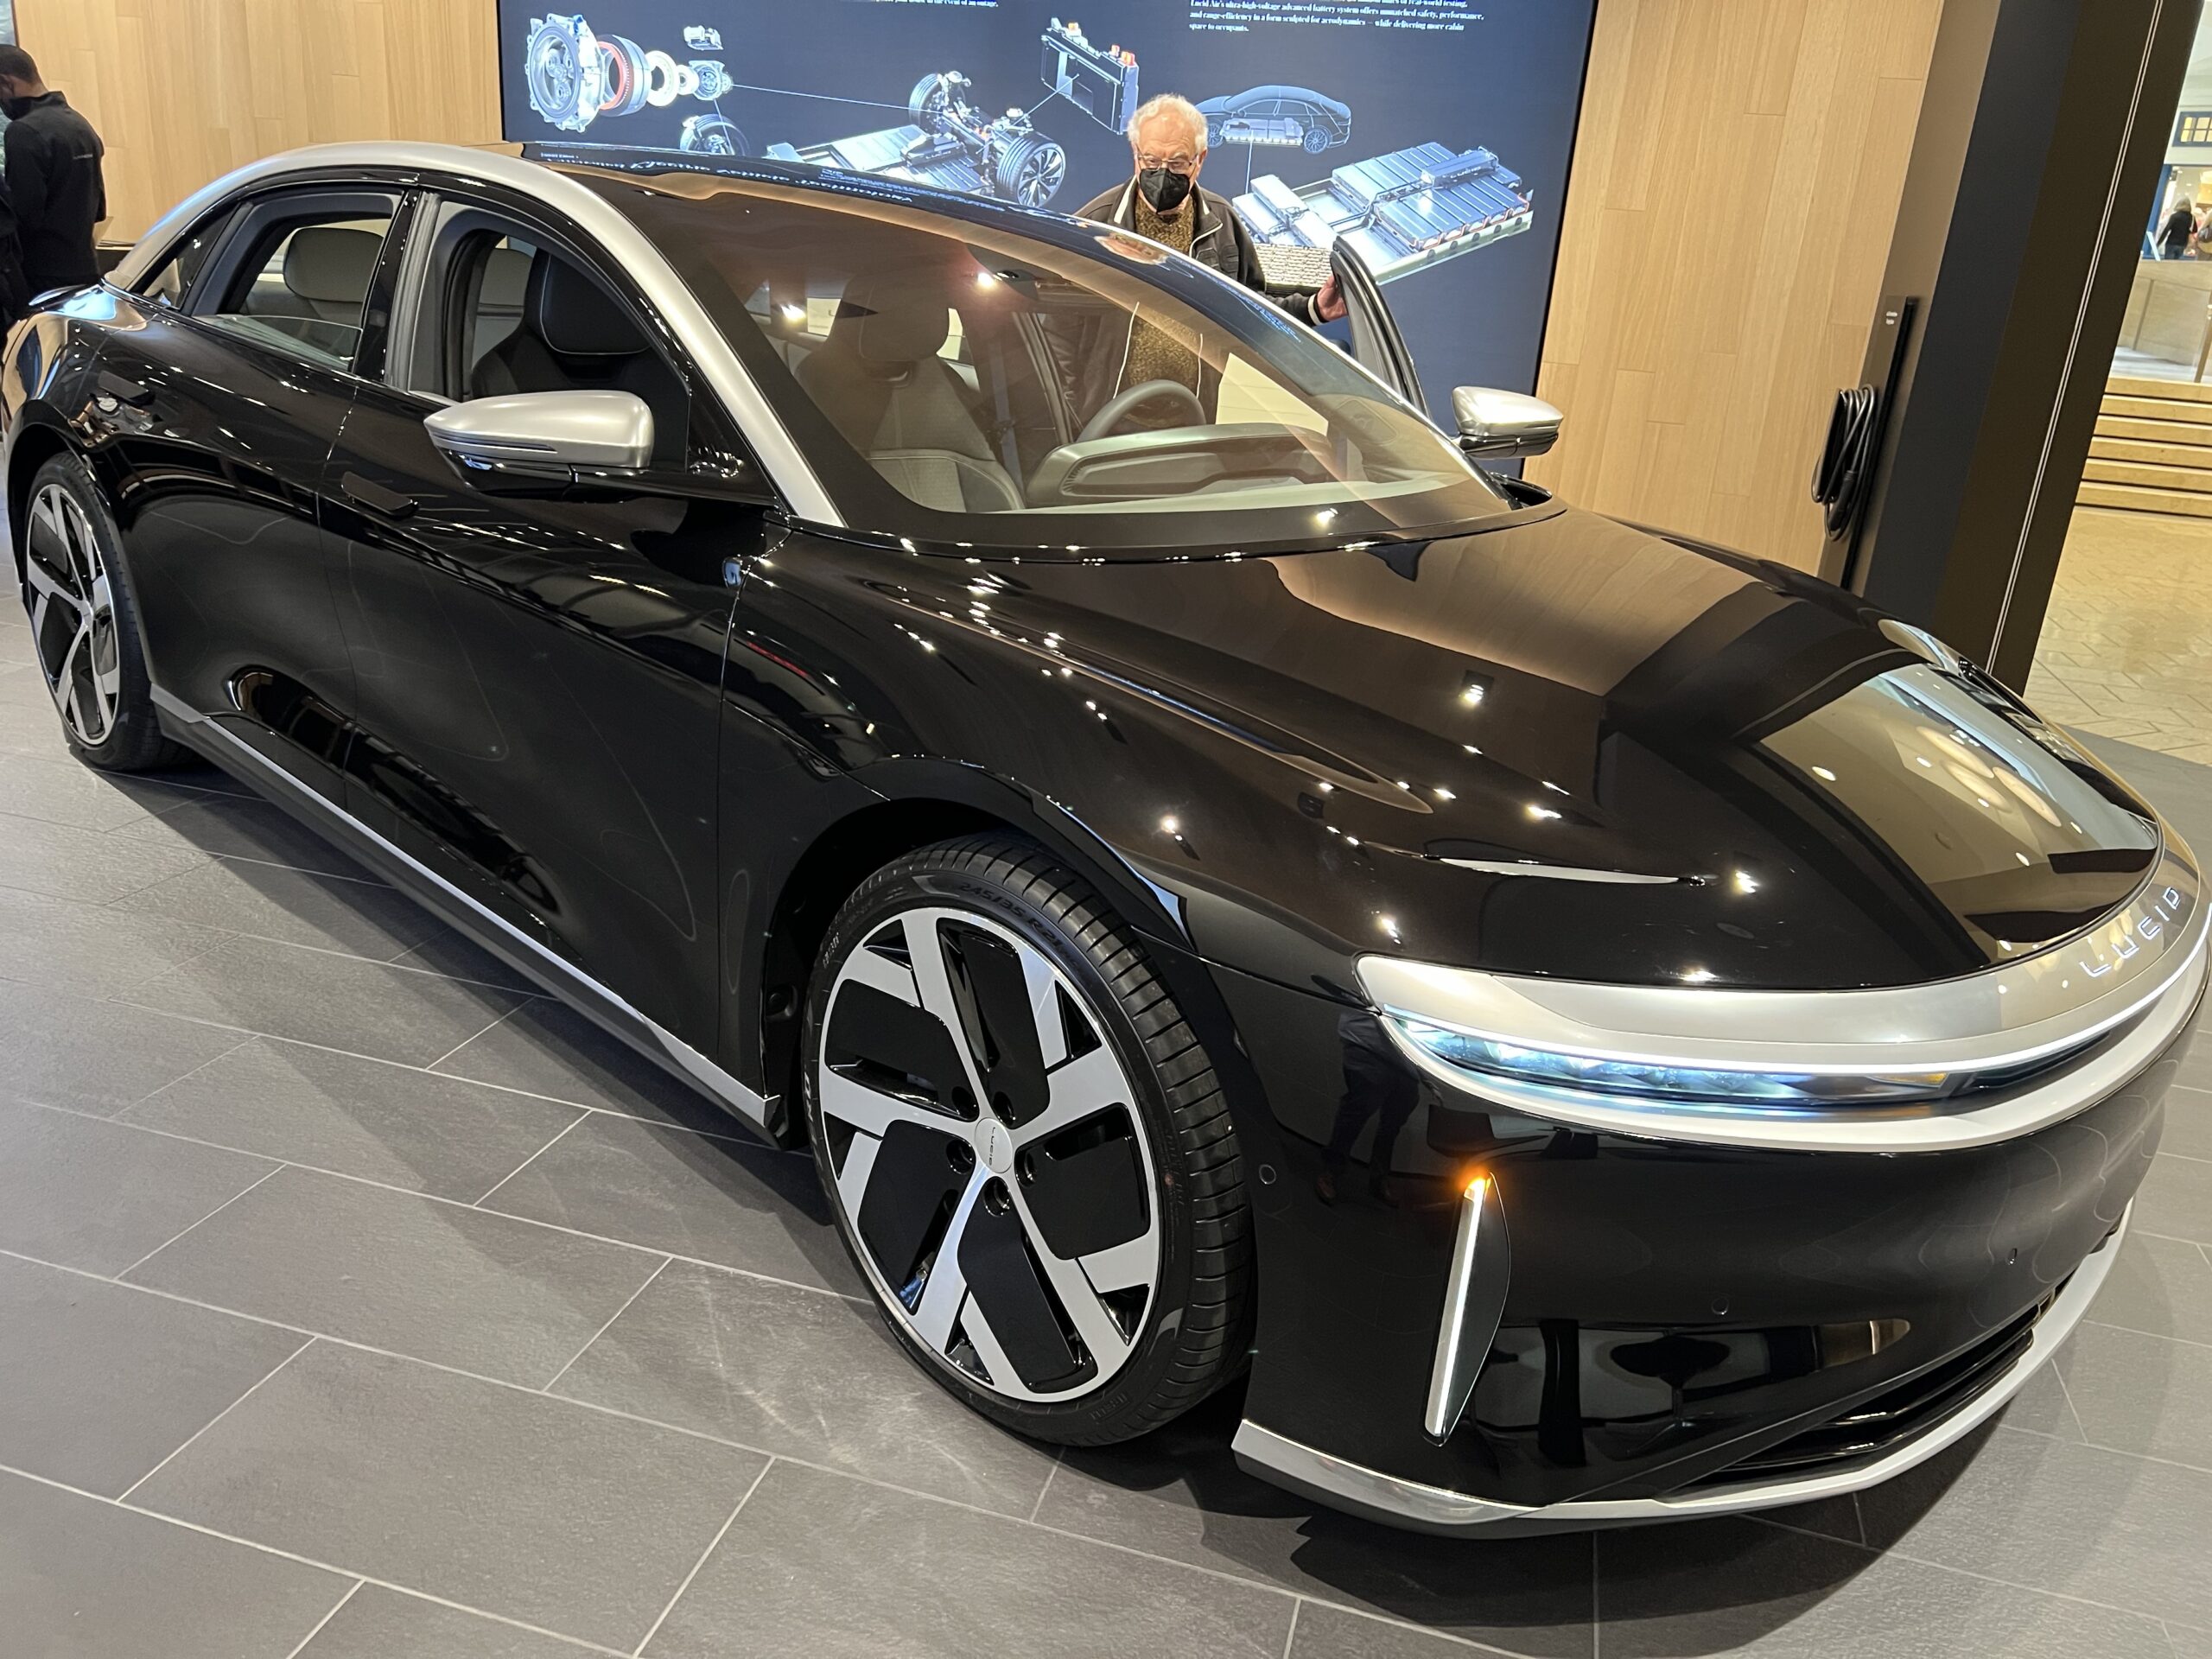 I Test Drove A Lucid Air Grand Touring Out Of Short Hills, New Jersey -  Lucid Insider Blog - Lucid Air & Lucid Motors News